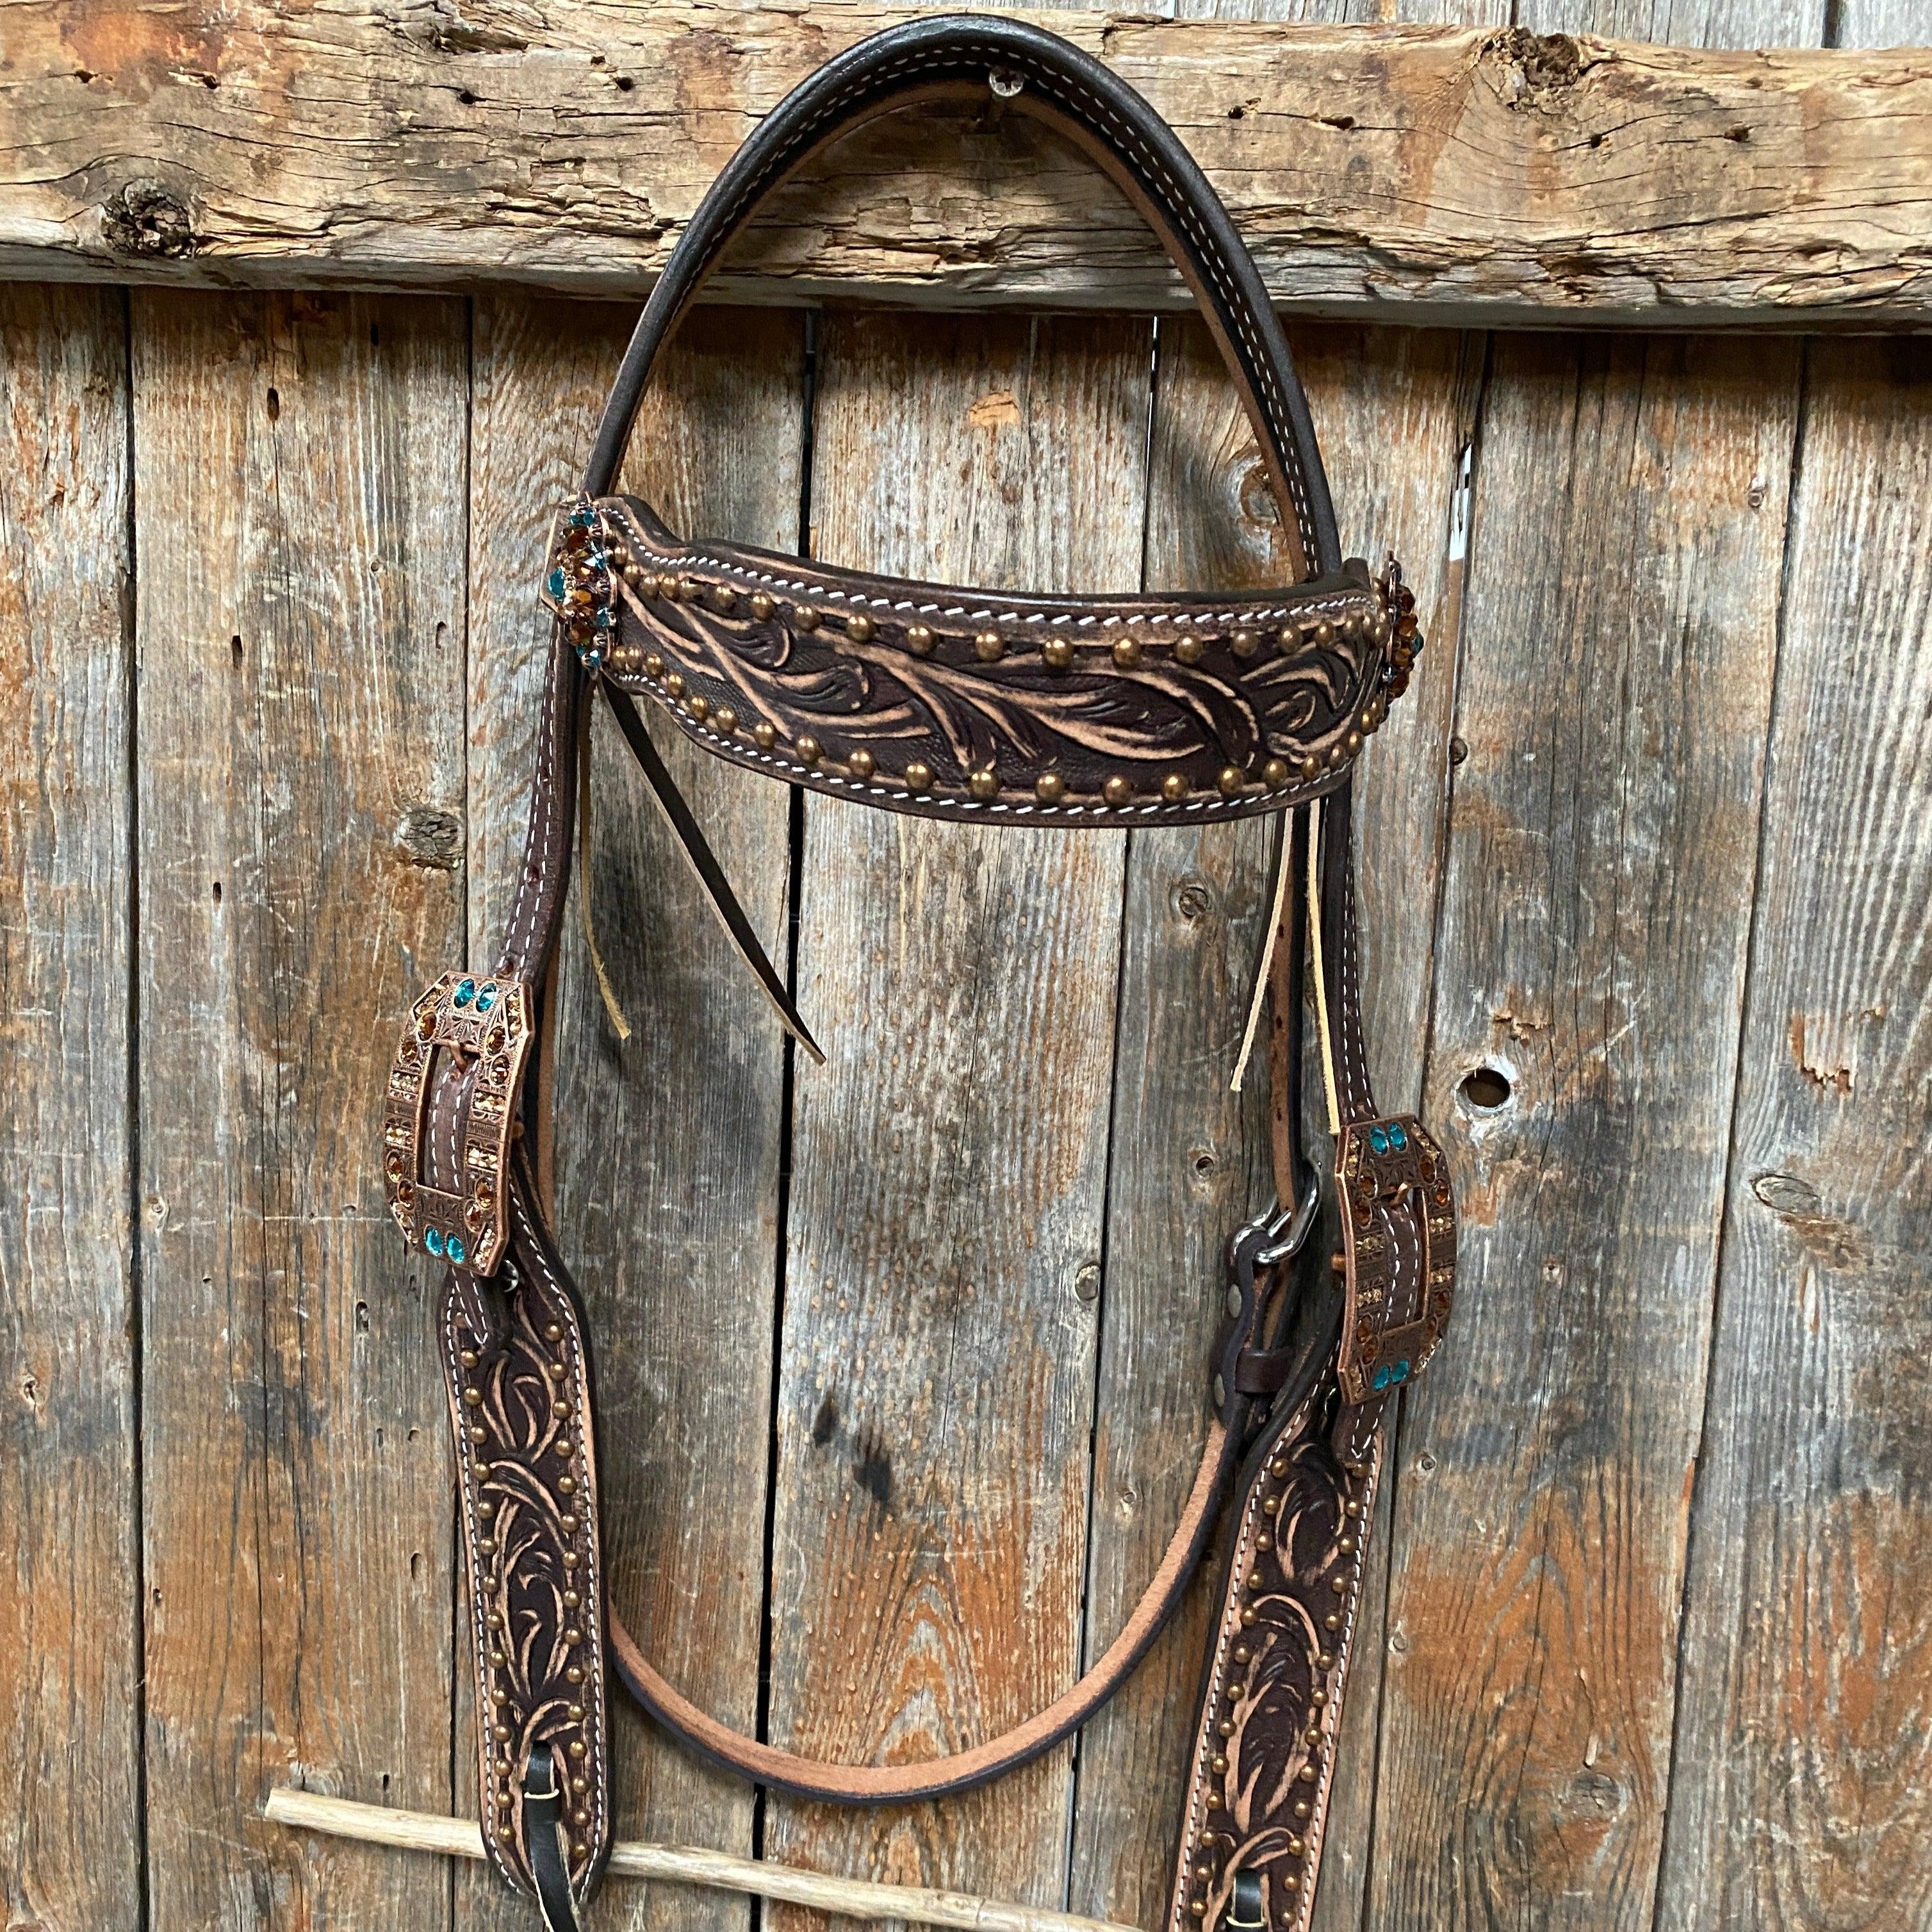 Brushed Chocolate Teal/Champagne/Topaz Browband & Breastcollar Tack Set #BBBC477 - RODEO DRIVE